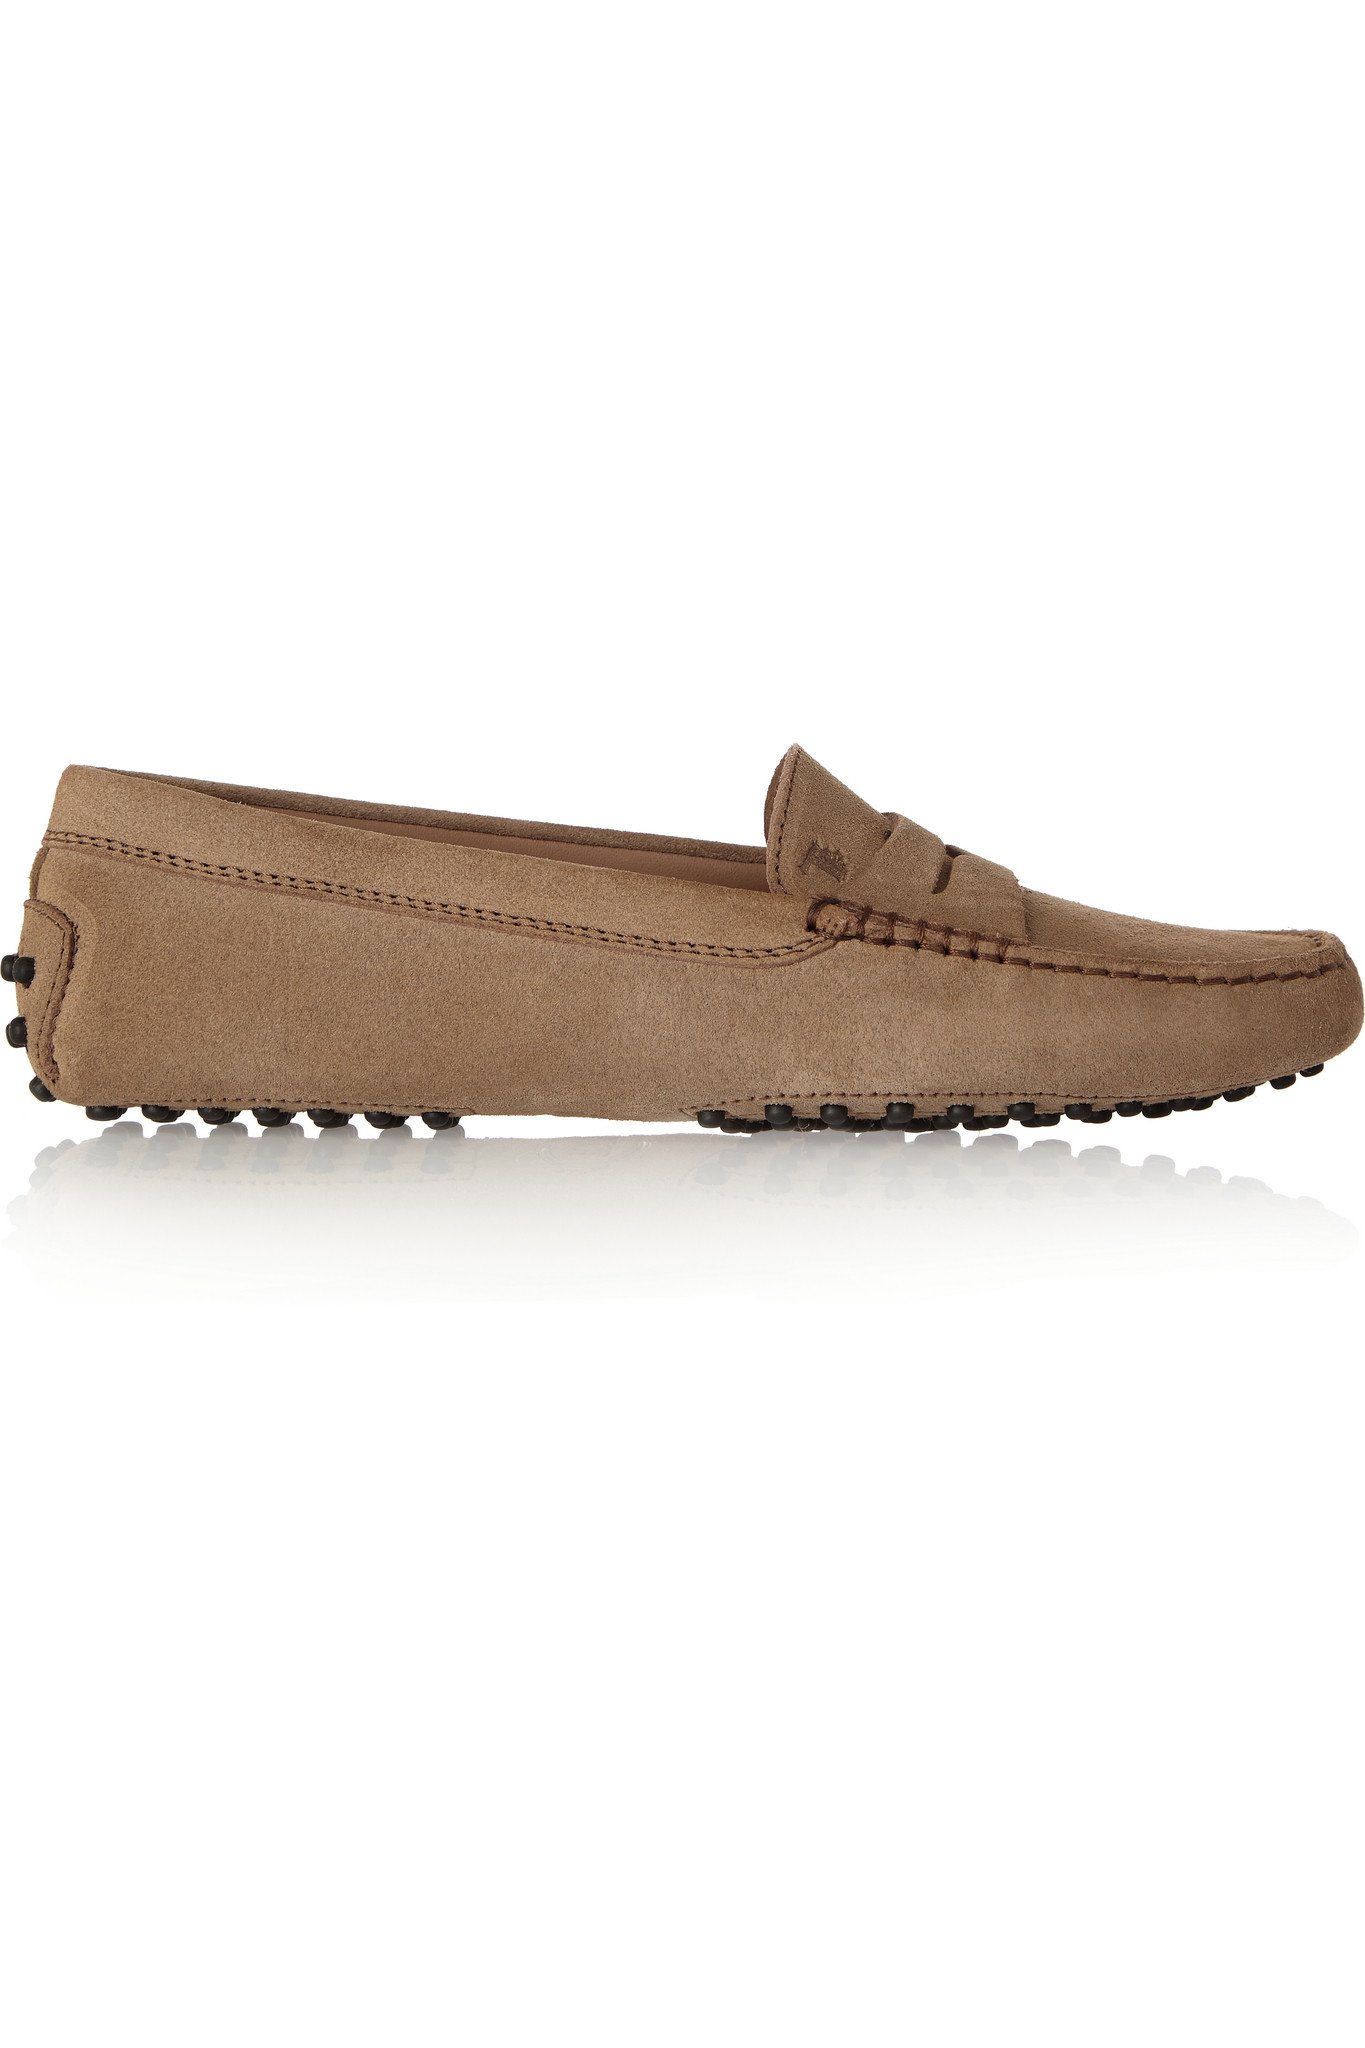 Tod's Gommino Driving Shoes in Tan Suede.jpg